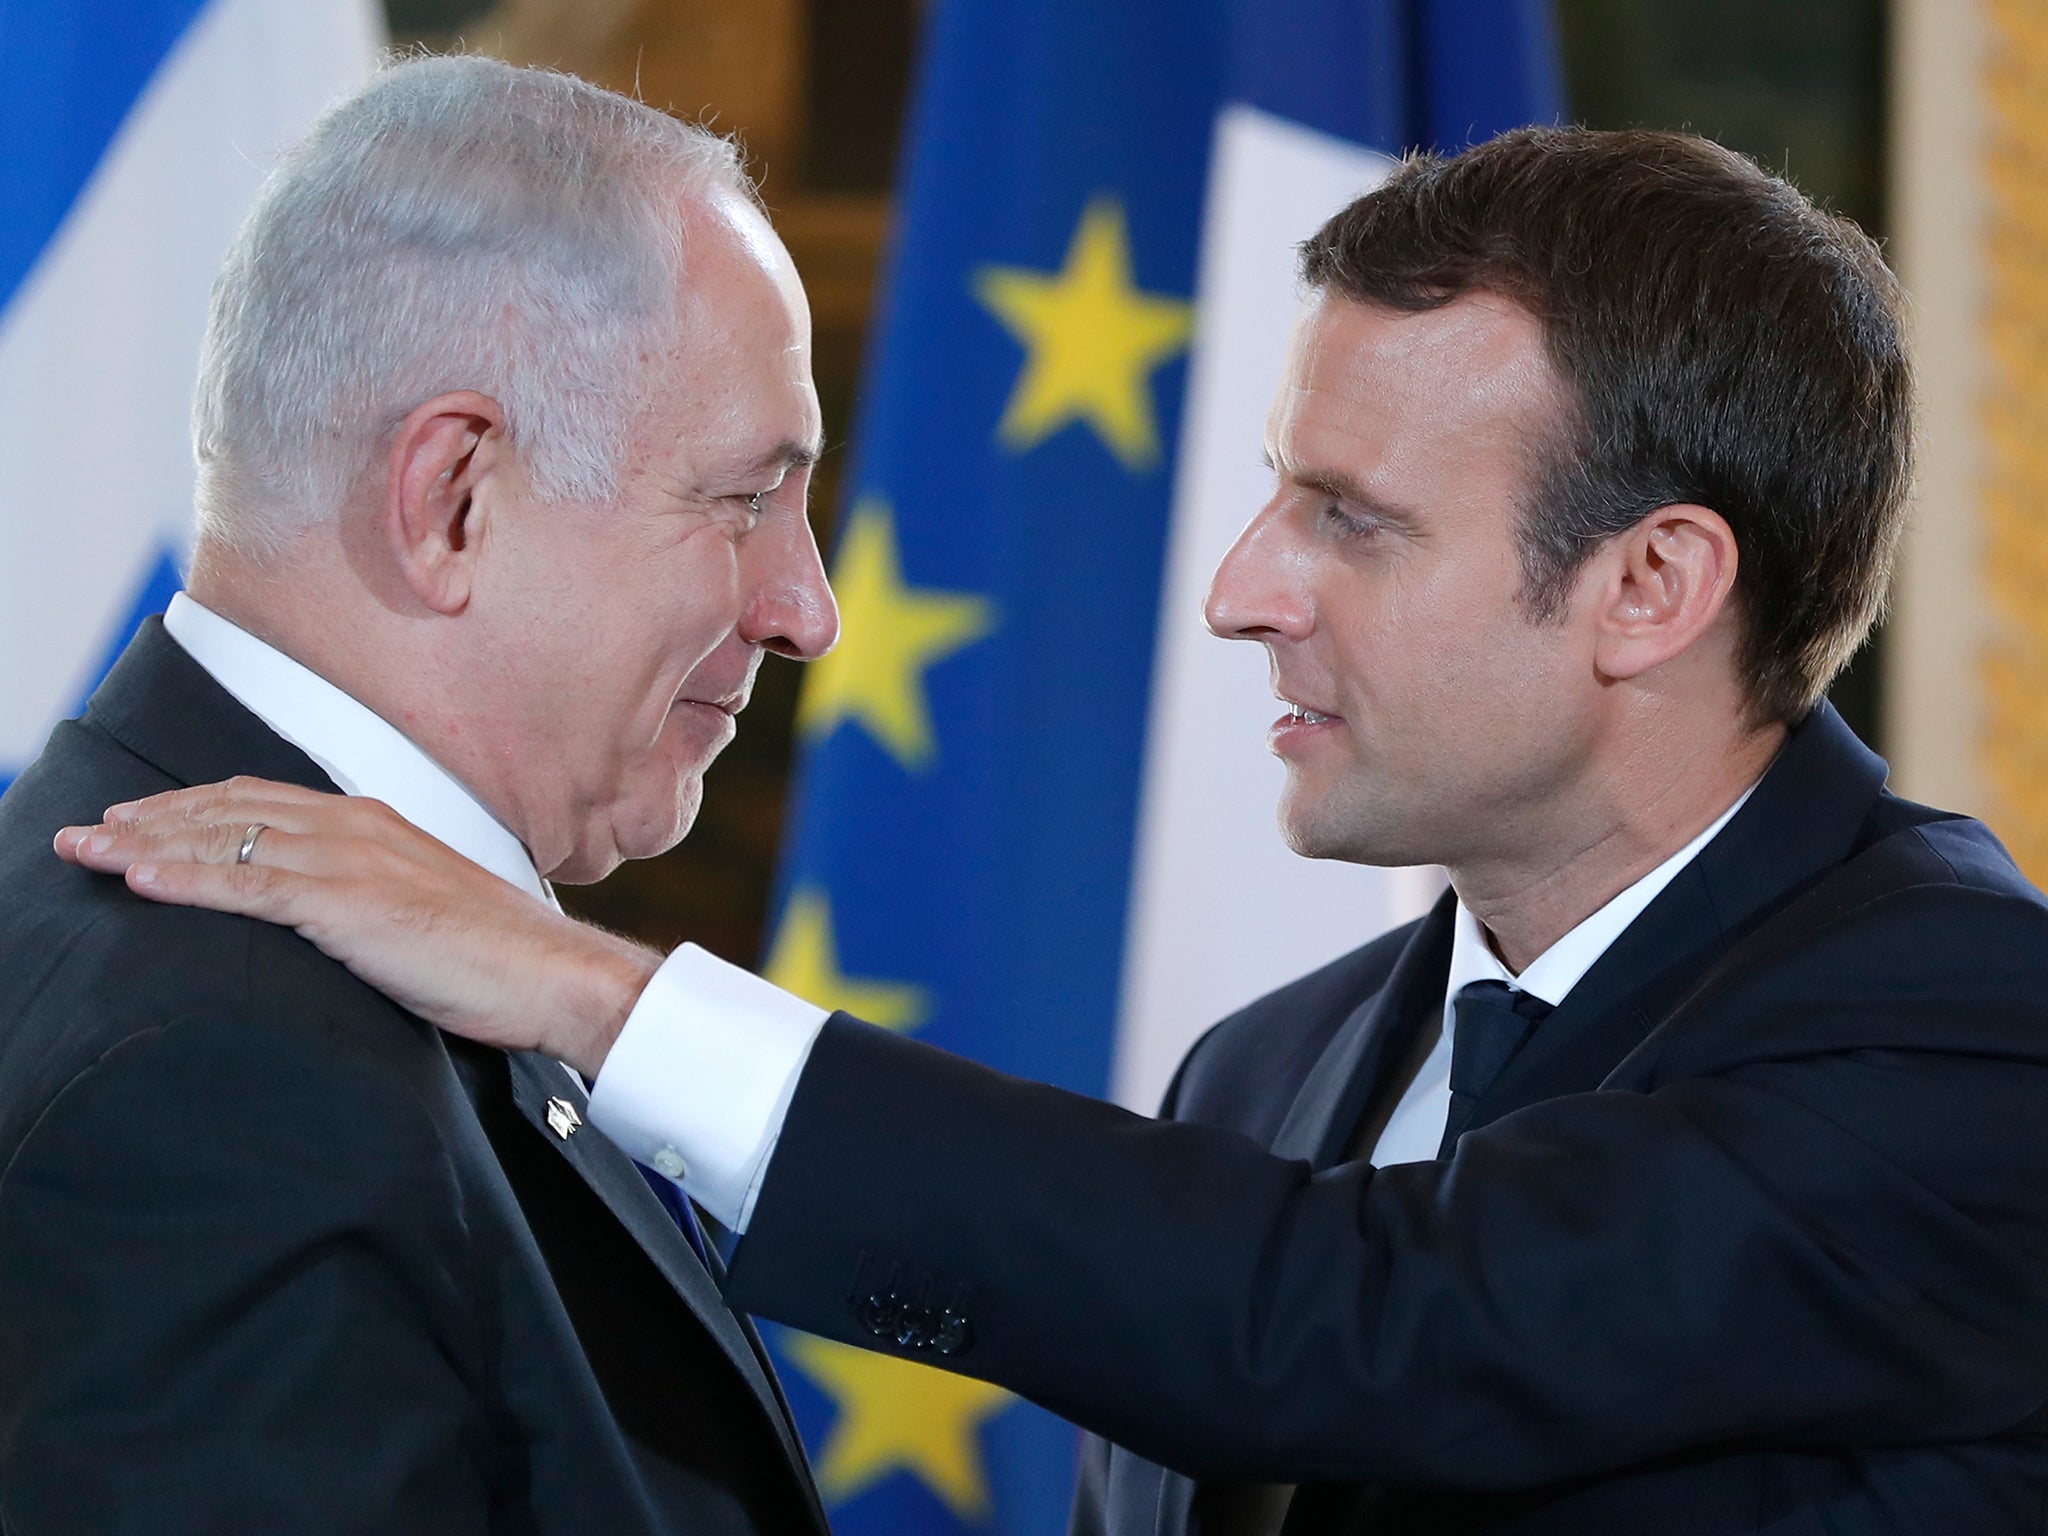 Emmanuel Macron told Benjamin Netanyahu he would stand up to anti-Zionist sentiment